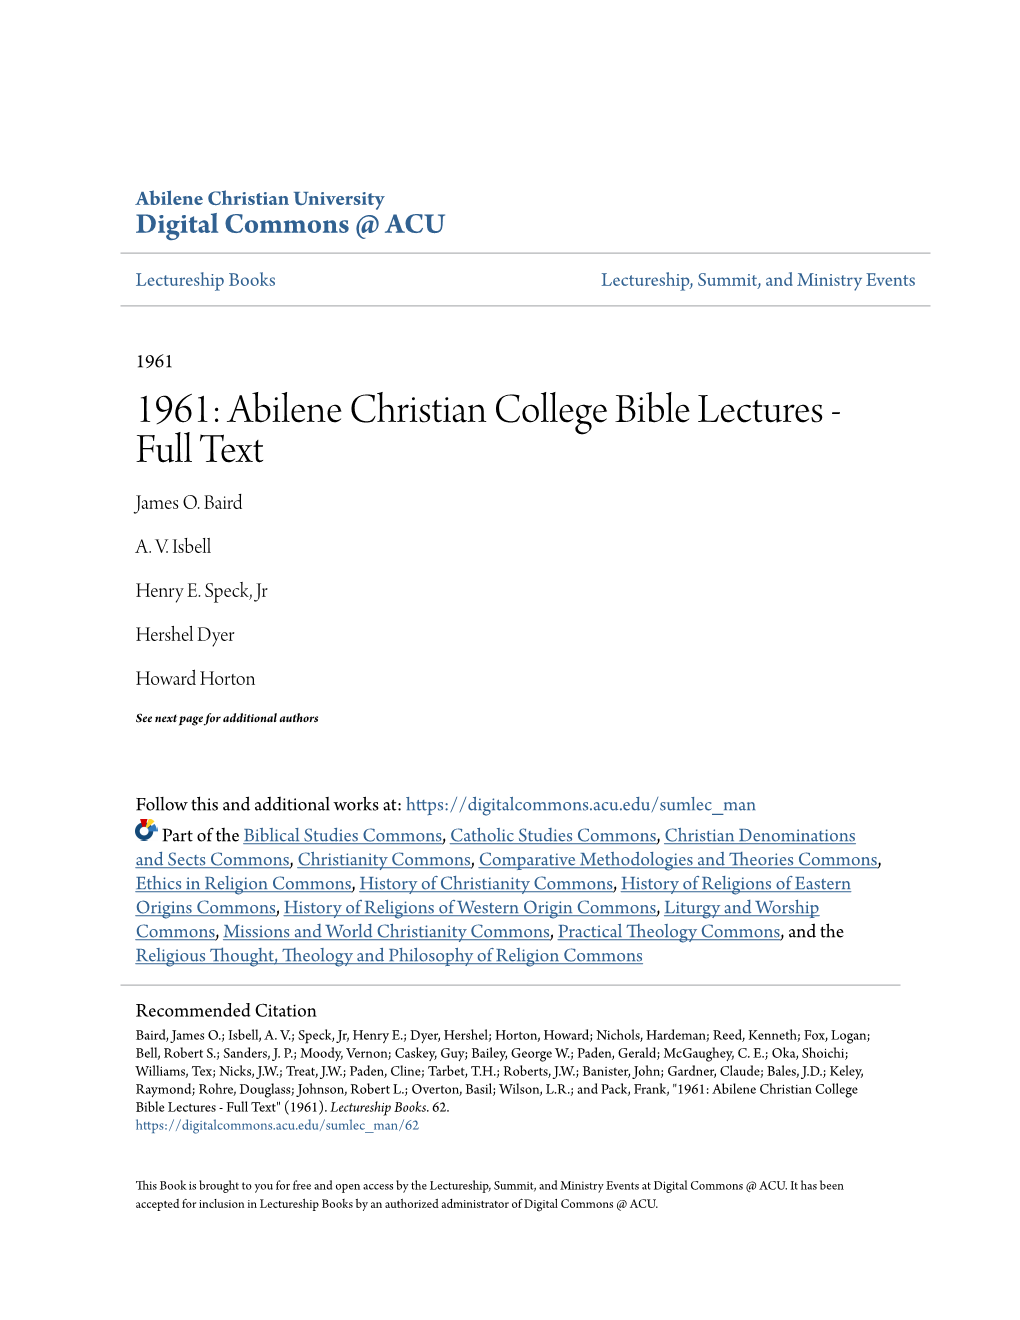 1961: Abilene Christian College Bible Lectures - Full Text James O